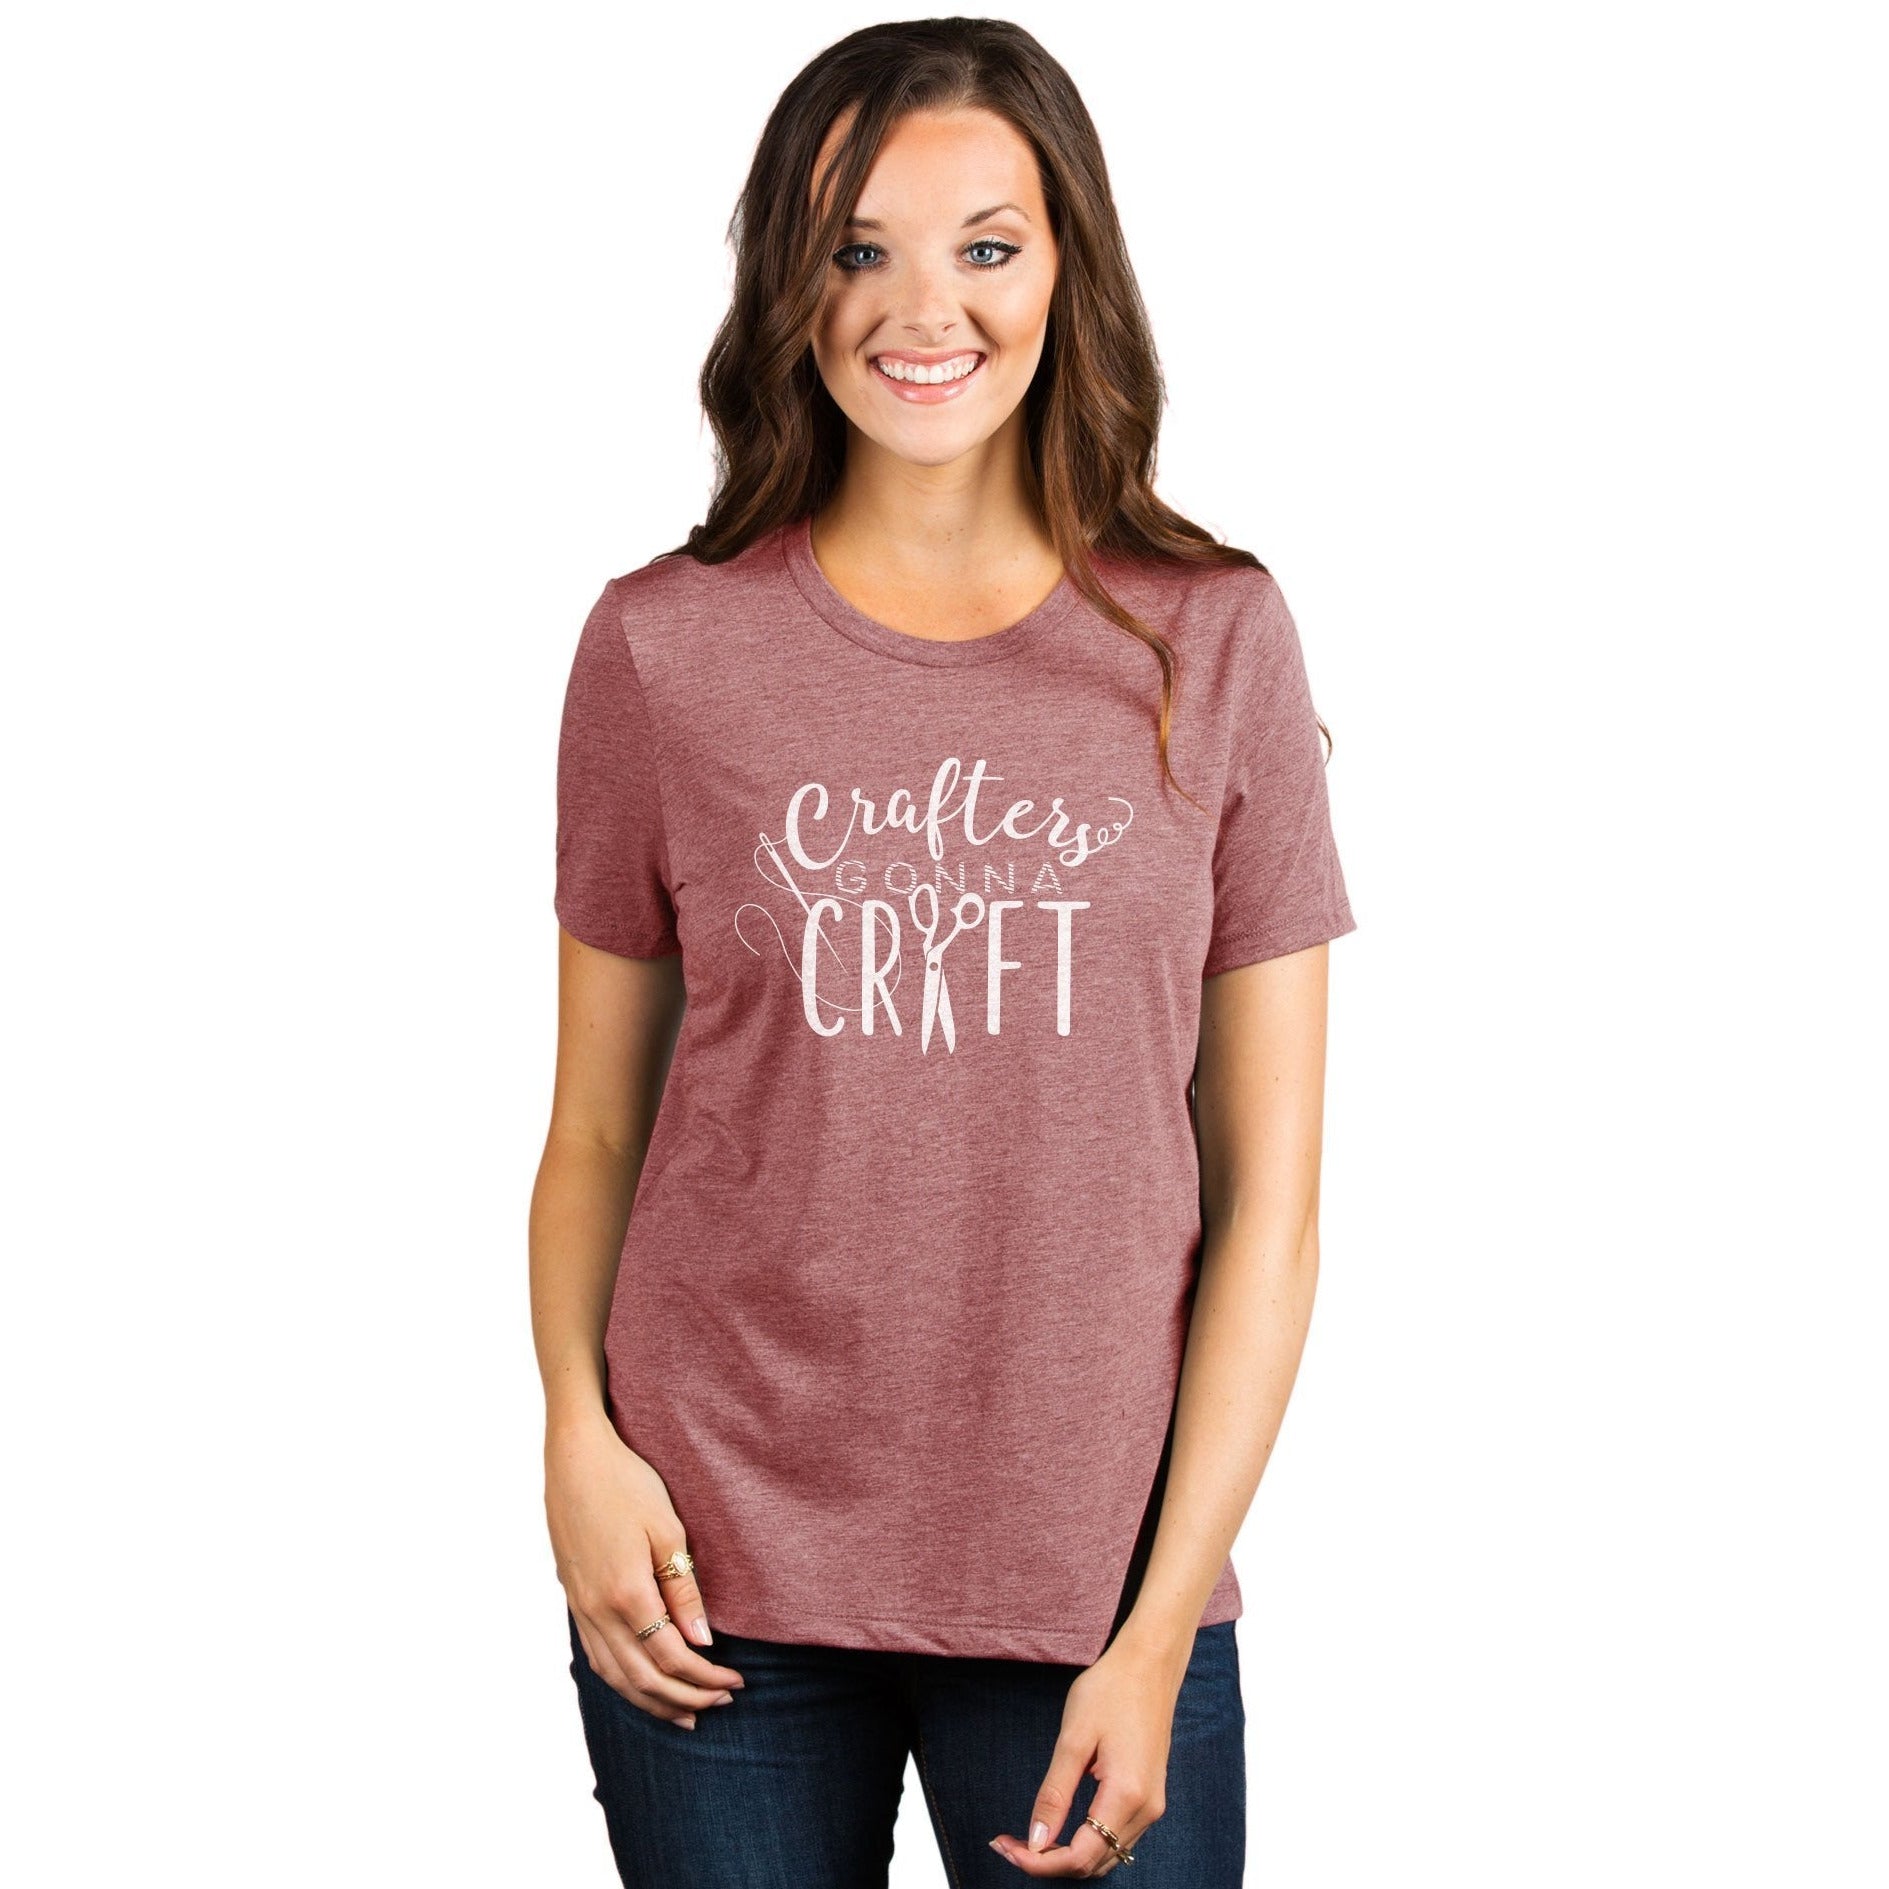 Crafters Gonna Craft Women's Relaxed Crewneck T-Shirt Top Tee Heather Rouge Model
